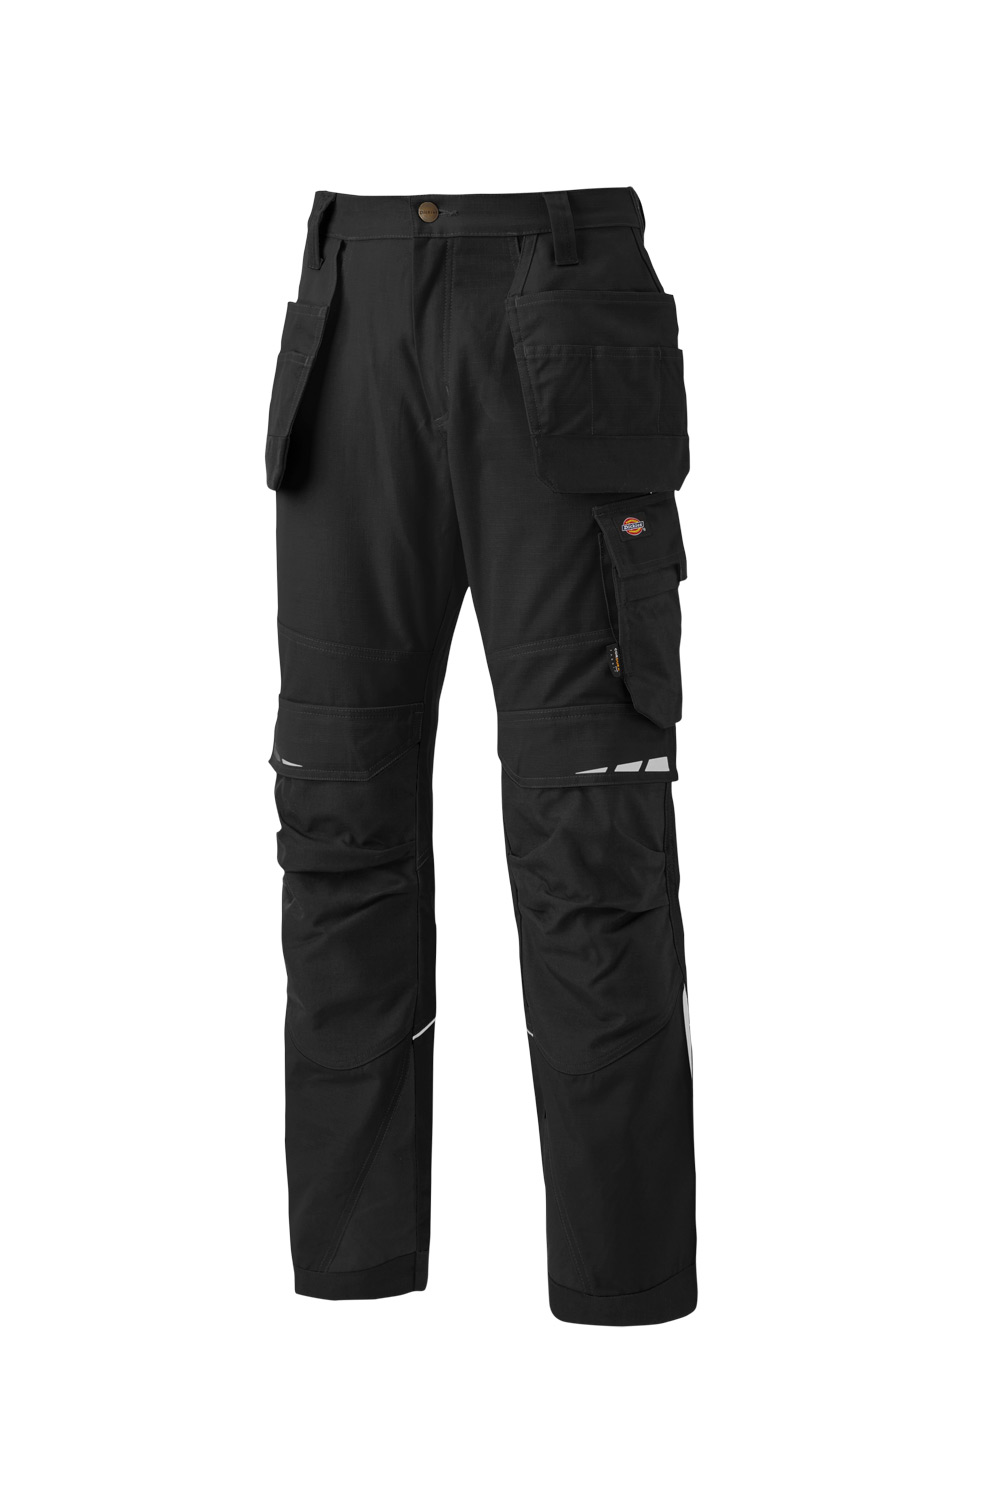 Details about   Dickies Pro Holster Trousers Mens Premium Heavy Duty Multi Pocket Pants DP1005 